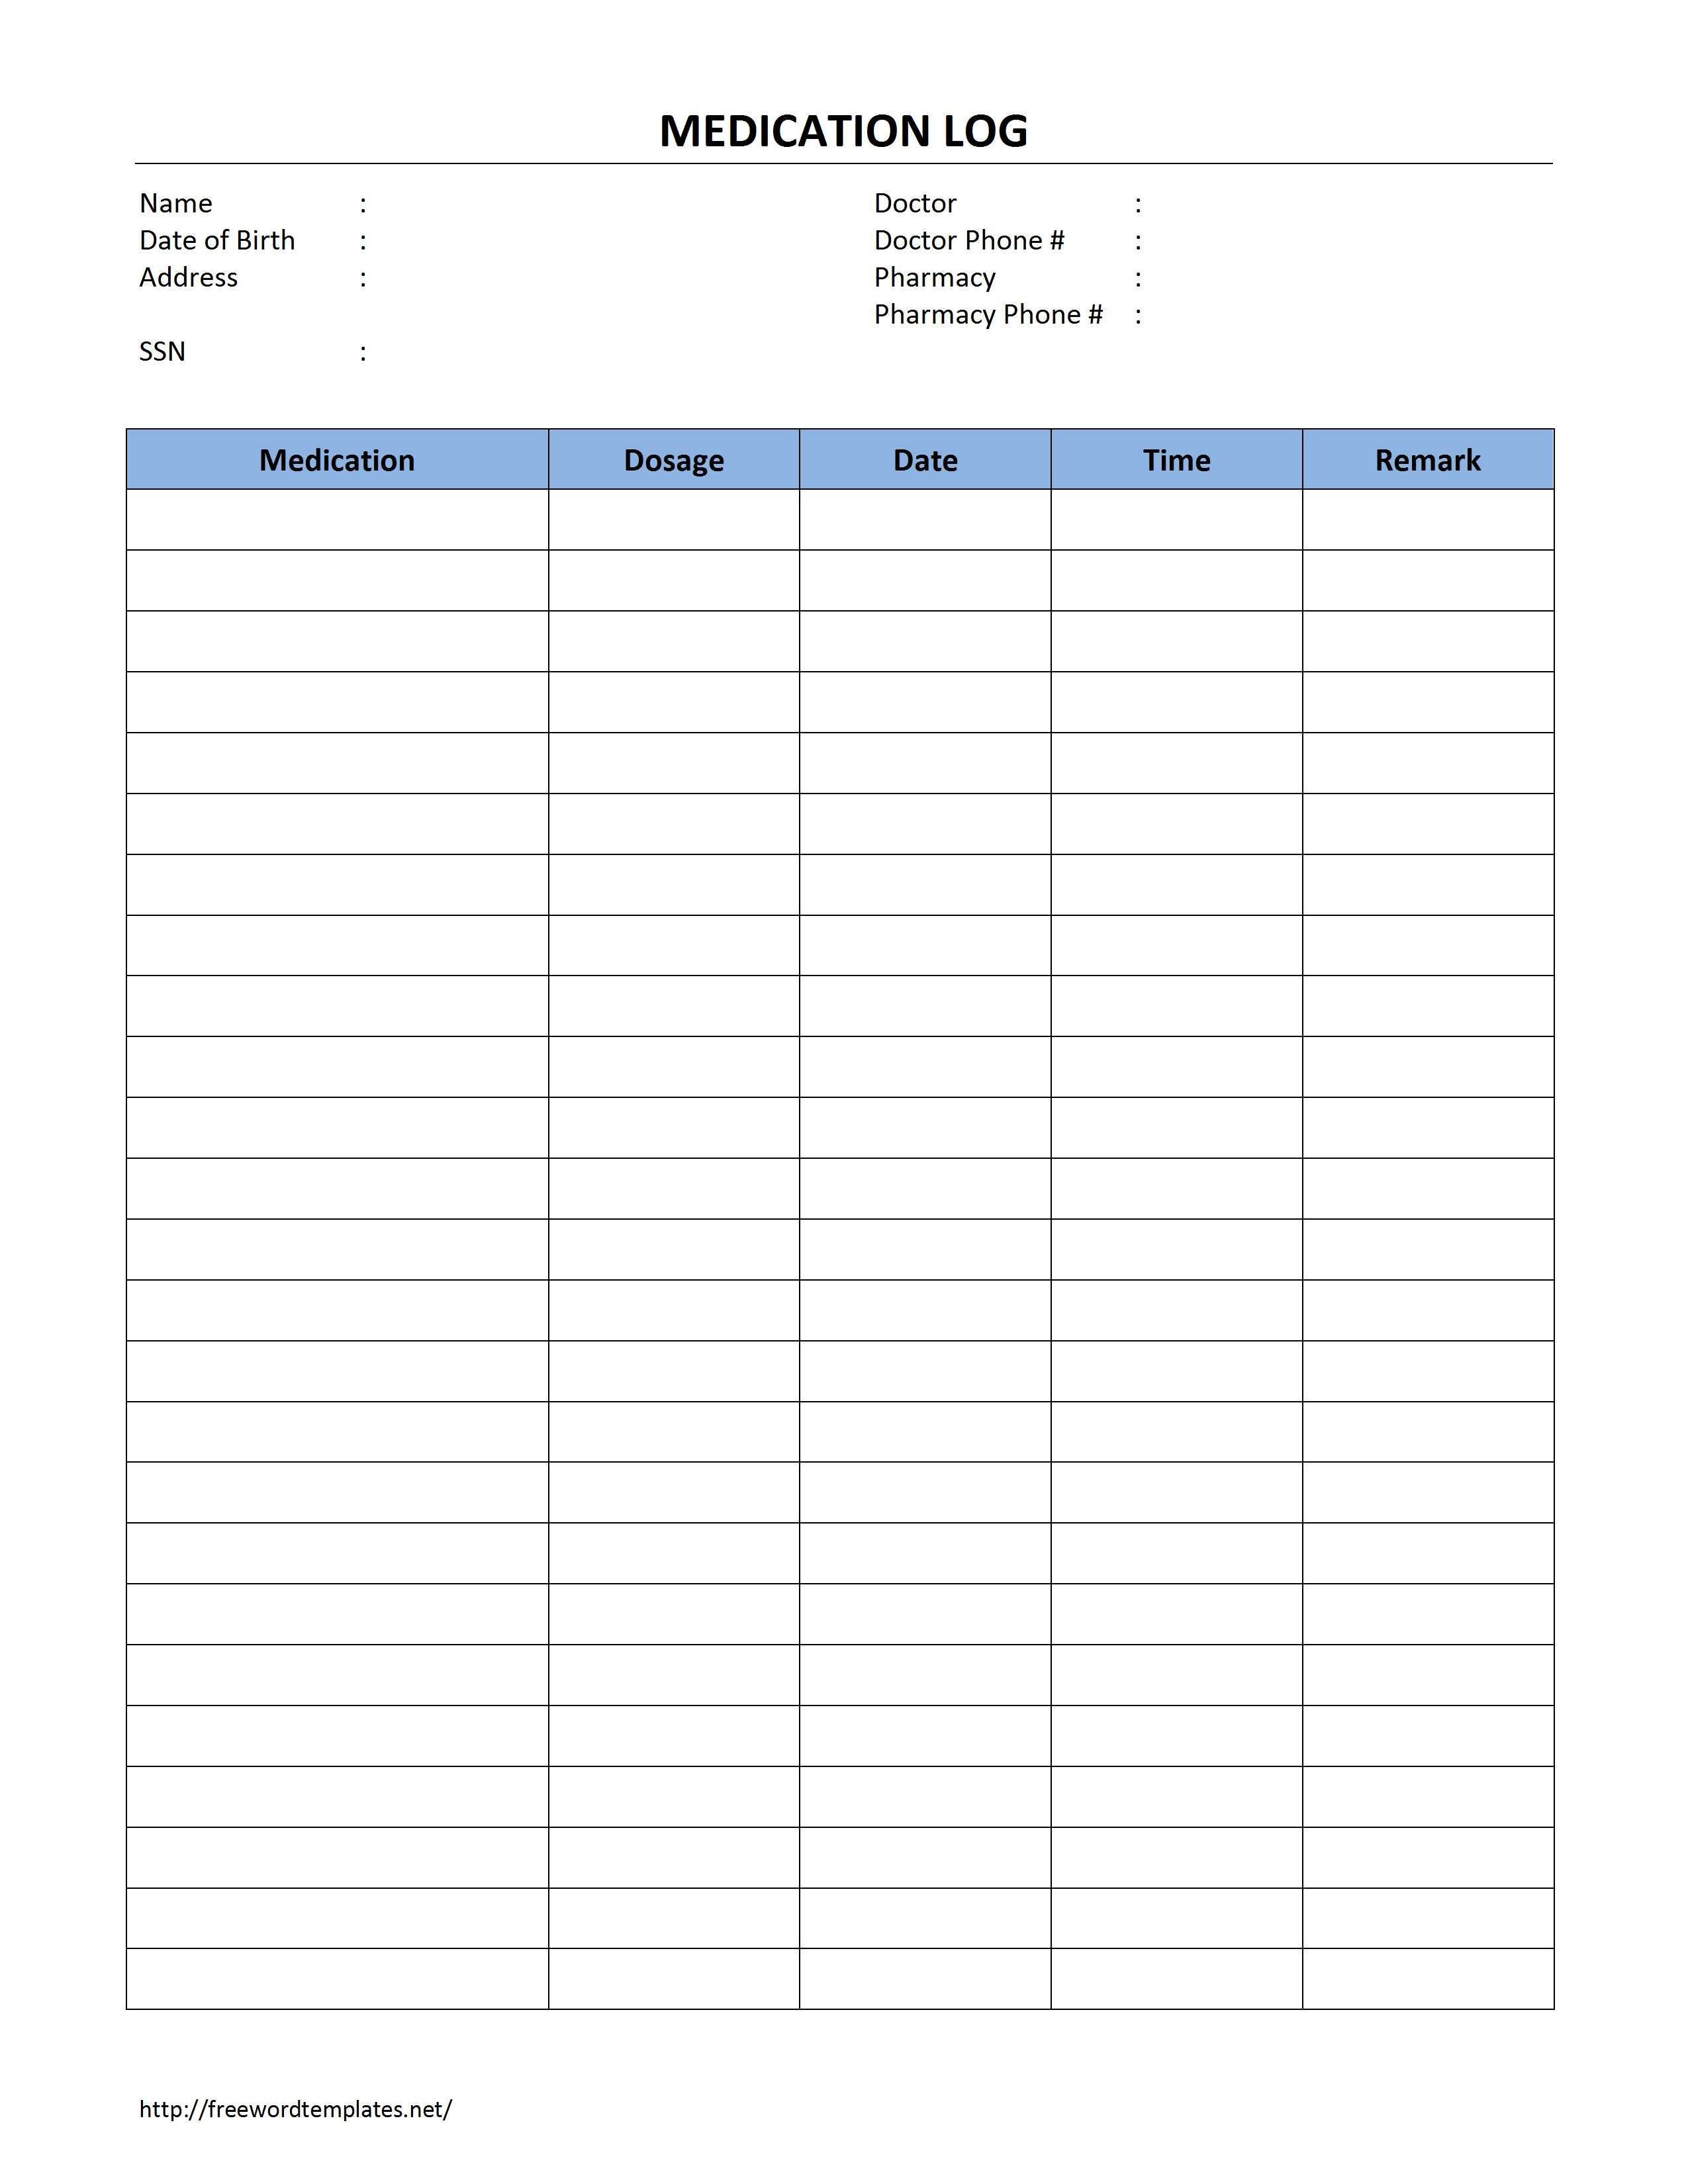 This is a medication log template that you can use to